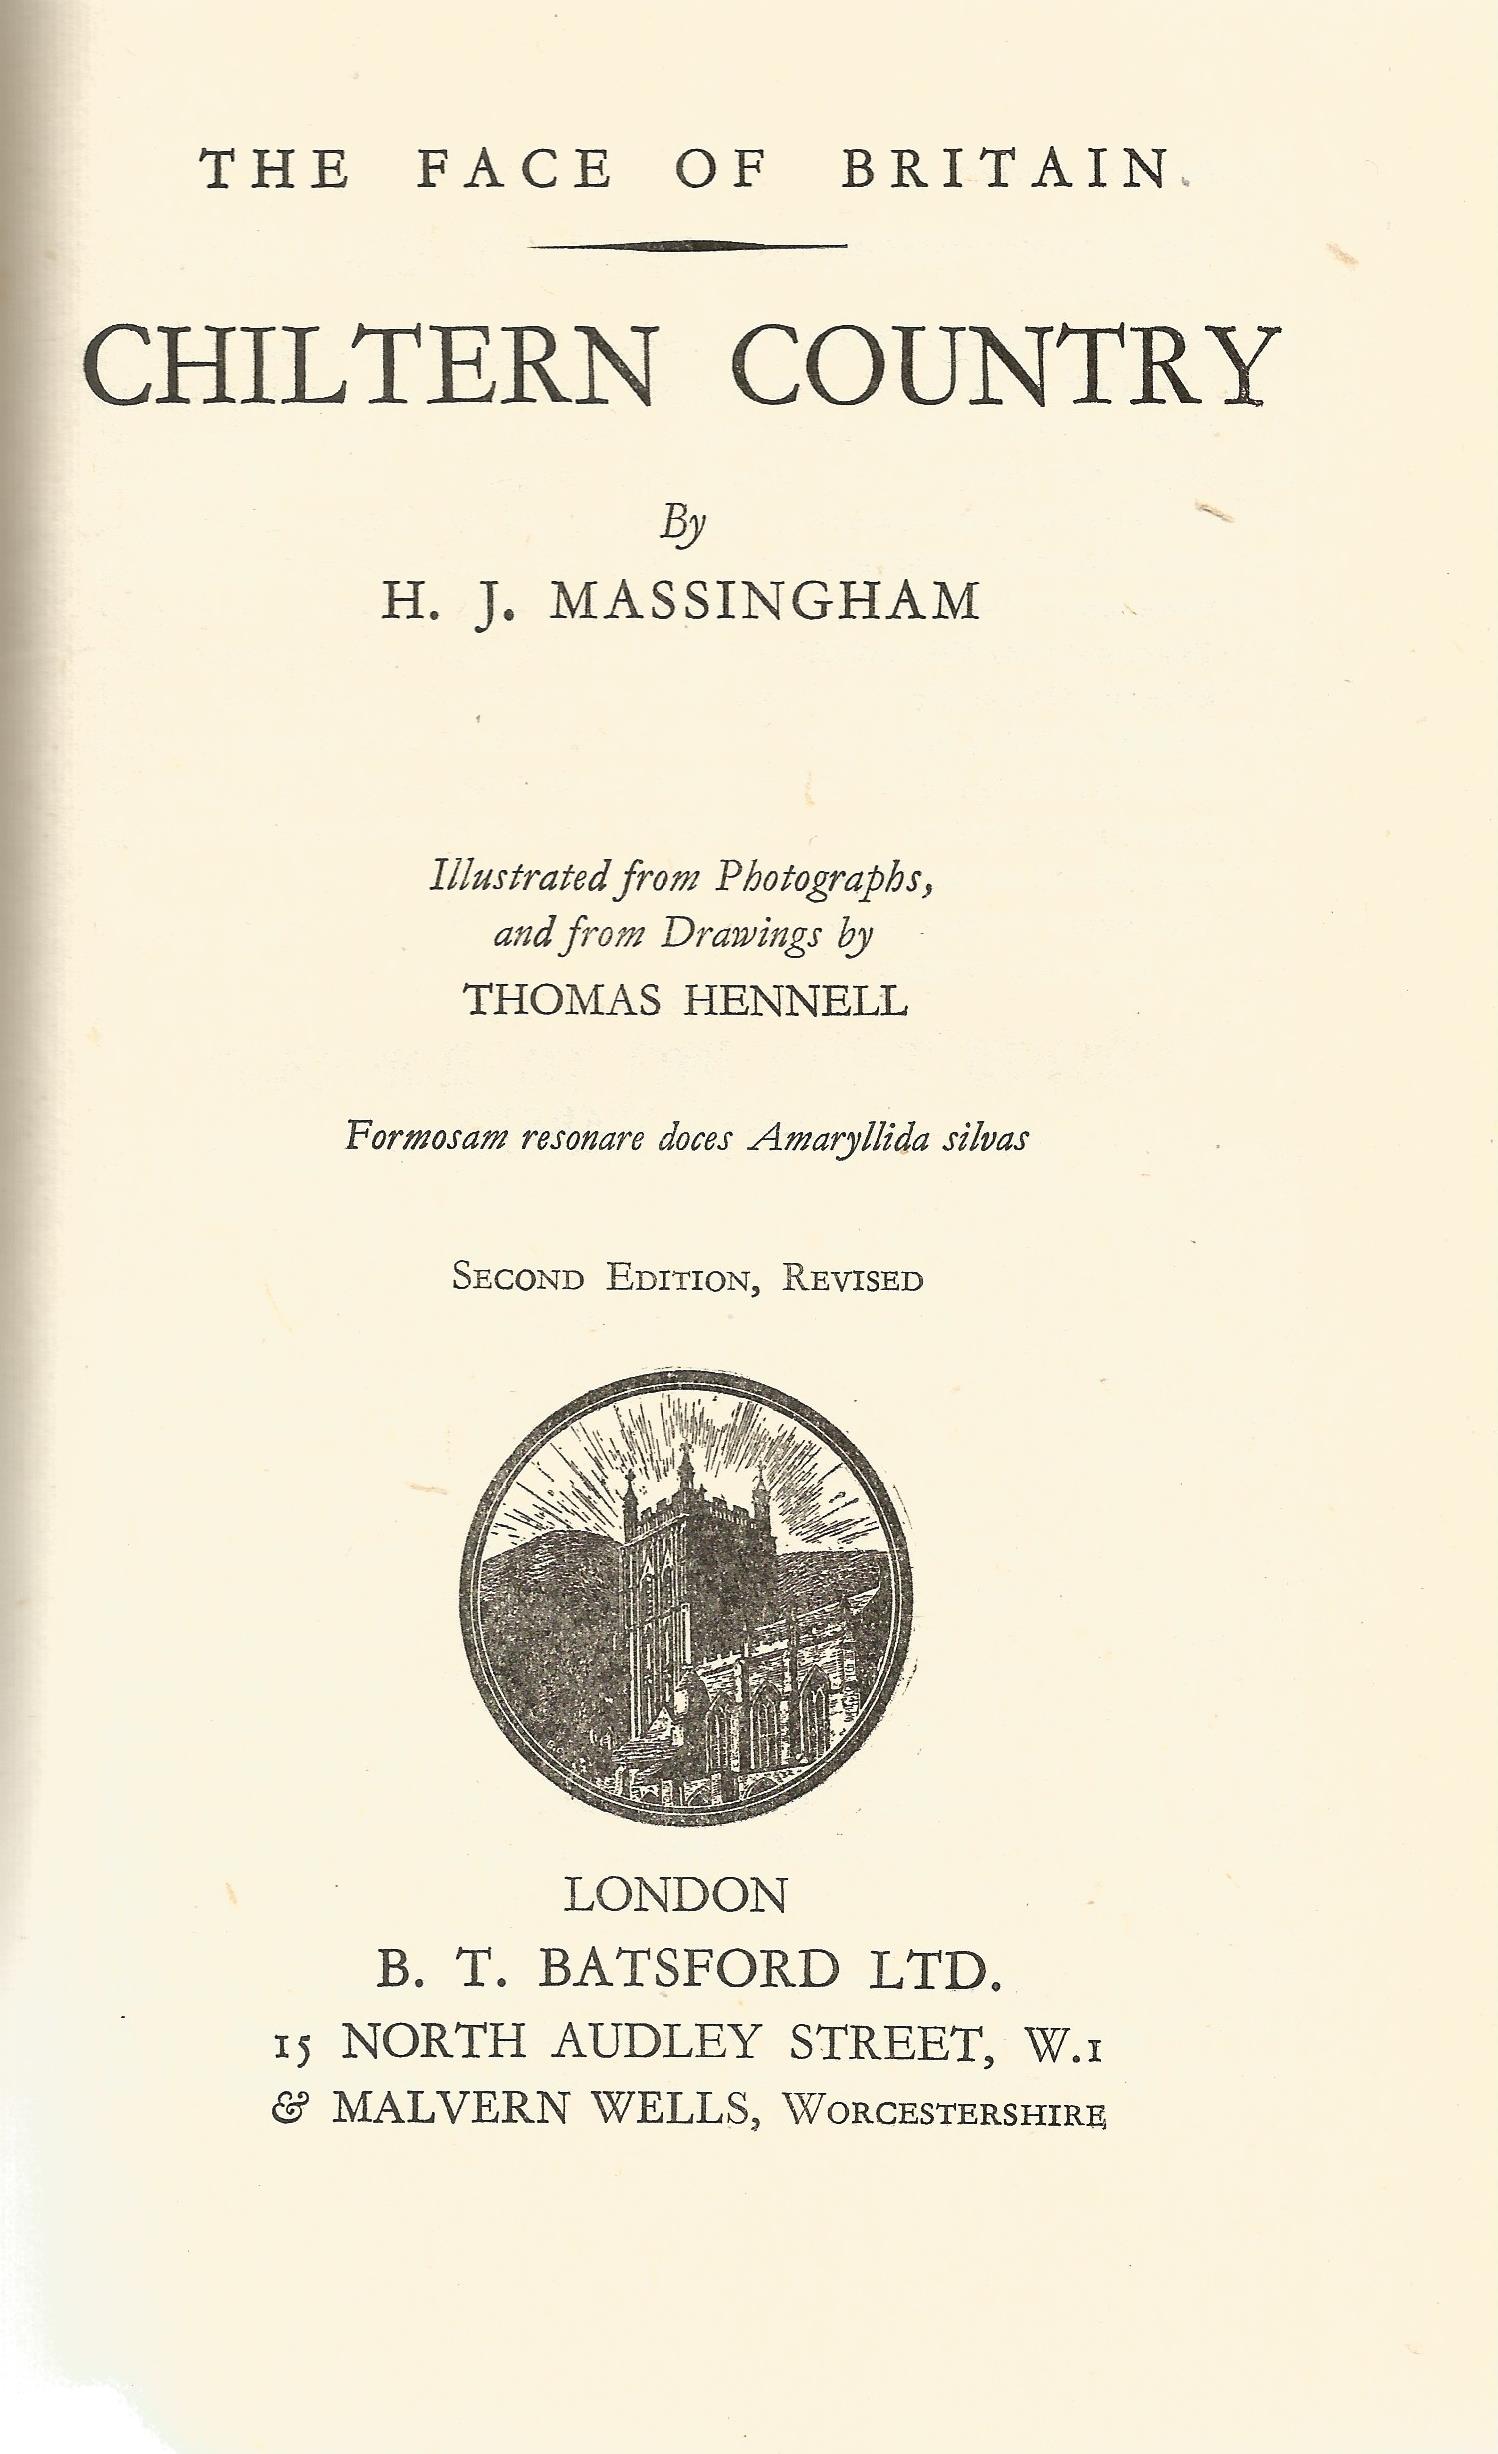 The Face of Britain Chiltern County by H J Massingham 1944 Second Edition Hardback Book published by - Image 2 of 3